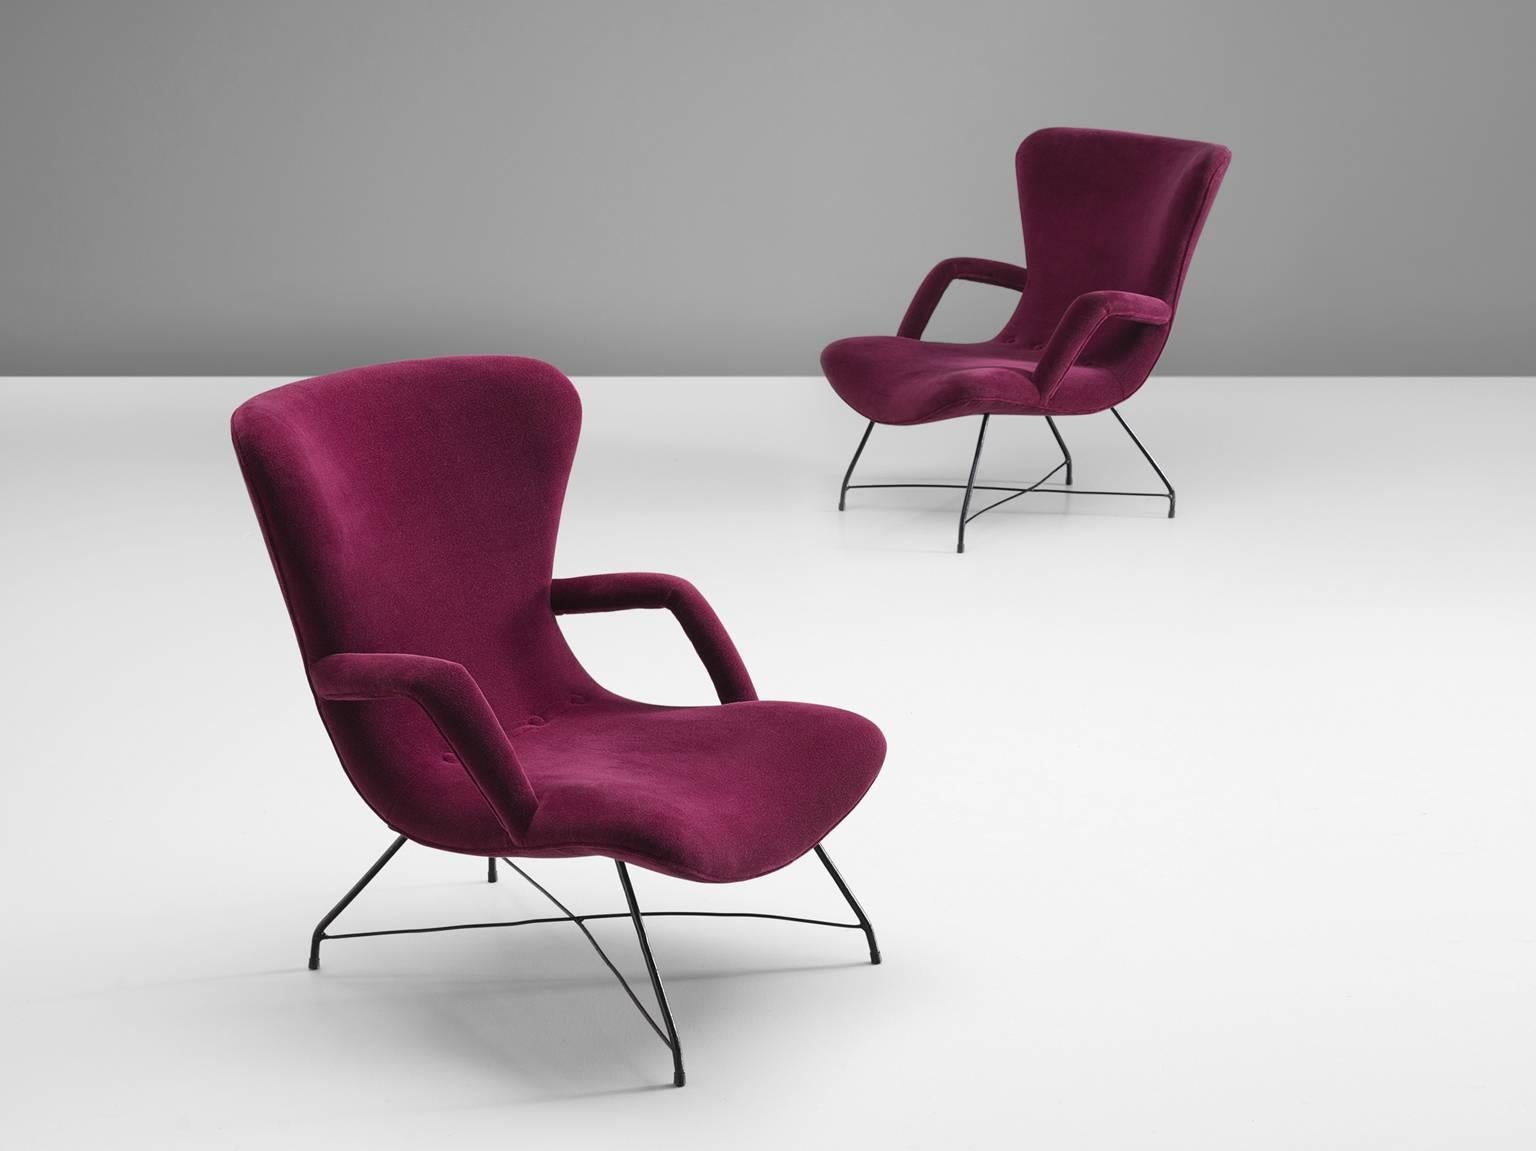 Pair of armchairs, in iron and pink magenta velvet fabric, by Carlo Hauner and Martin Eisler for Forma, Brazil, 1950s. 

Elegant and modern armchairs by Brazilian designer duo Hauner & Eisler. The frame is made from thin, elegant wrought iron.